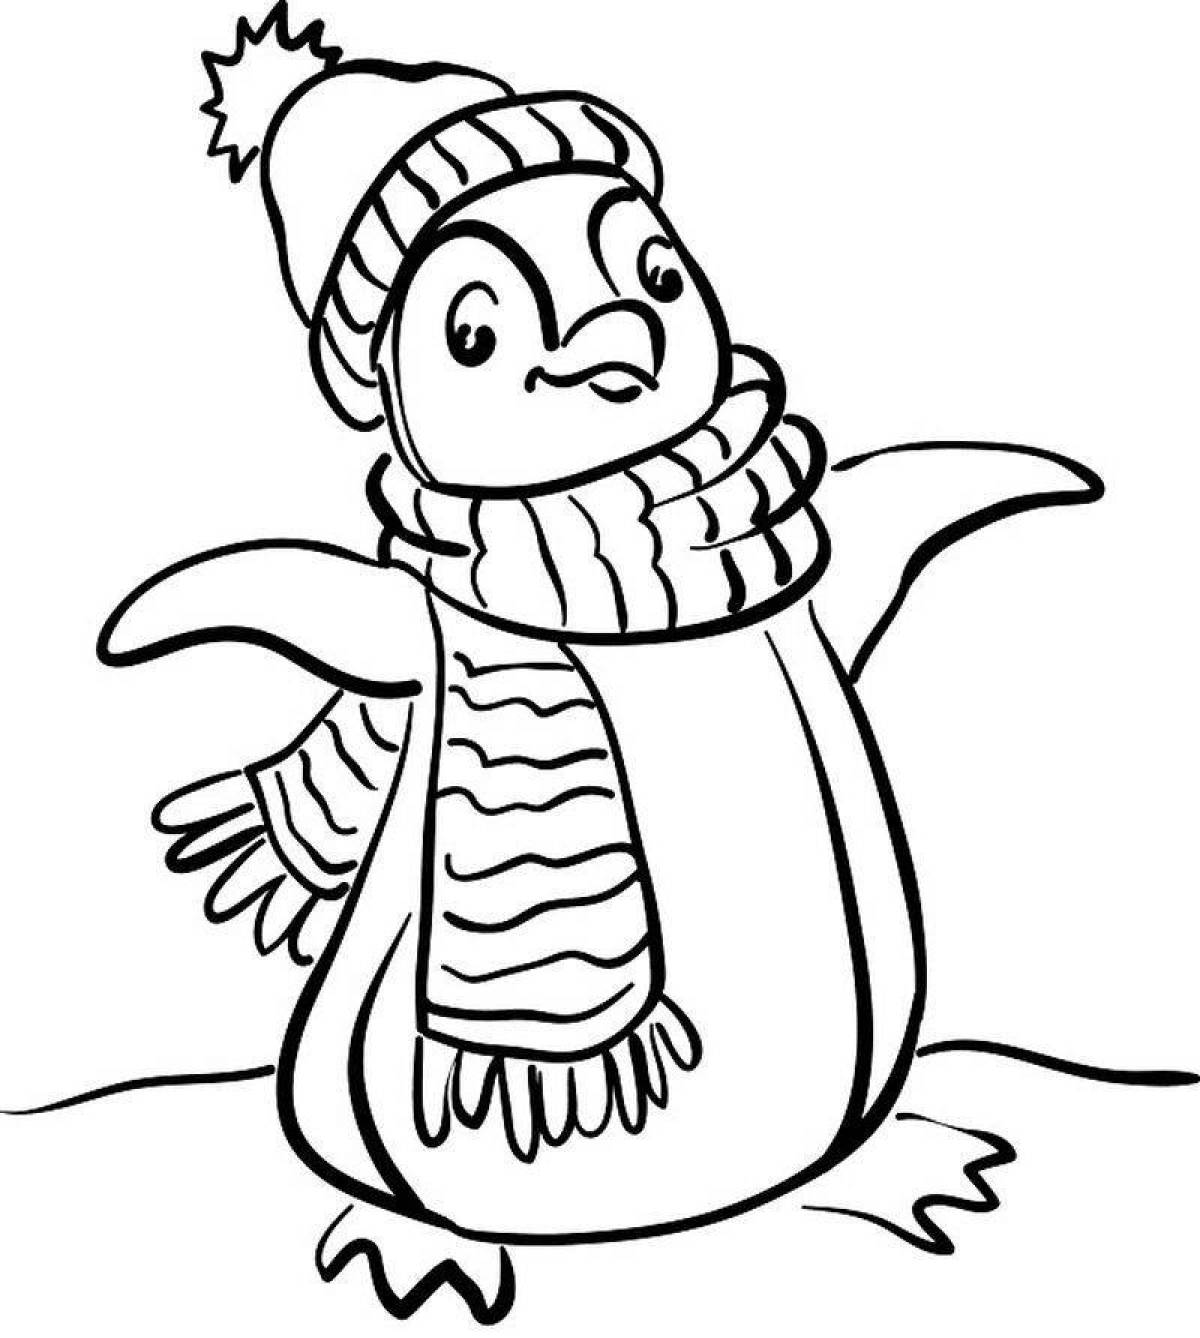 Big penguin coloring pages for kids